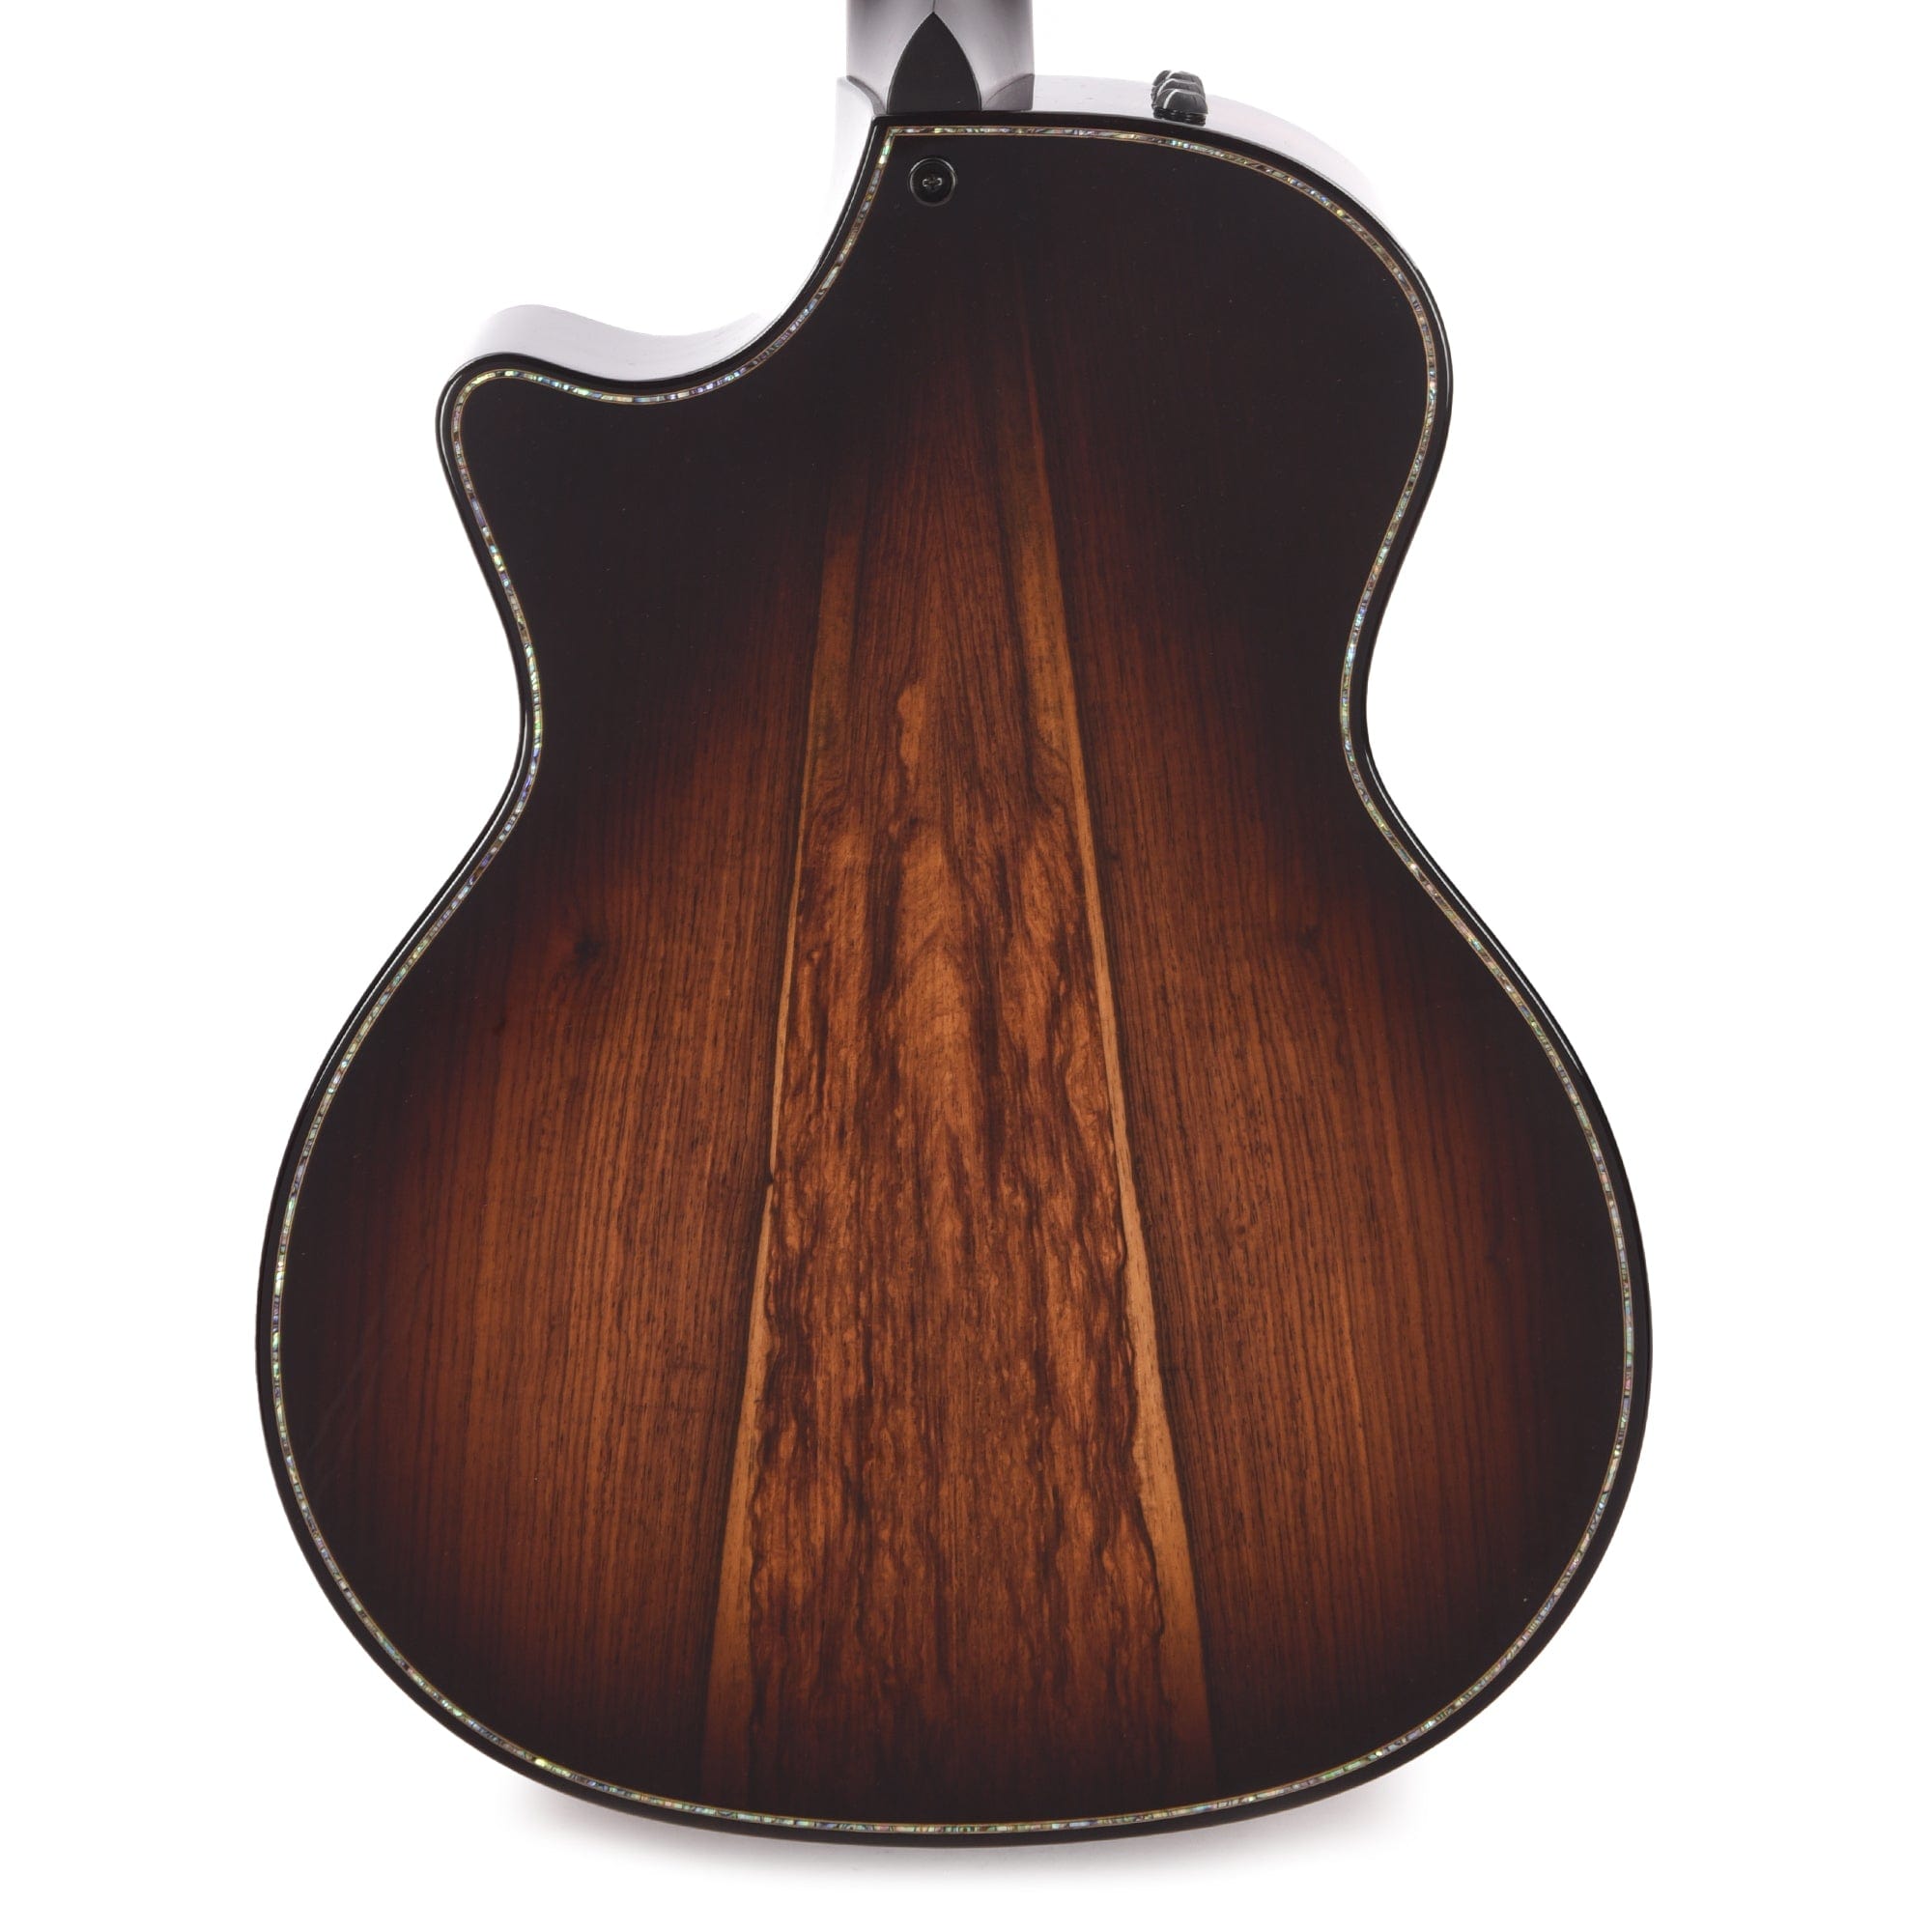 Taylor Builder's Edition 914ce Grand Auditorium Stripy Sinker Redwood/Rosewood Natural Top (Serial #1211133083) Acoustic Guitars / OM and Auditorium